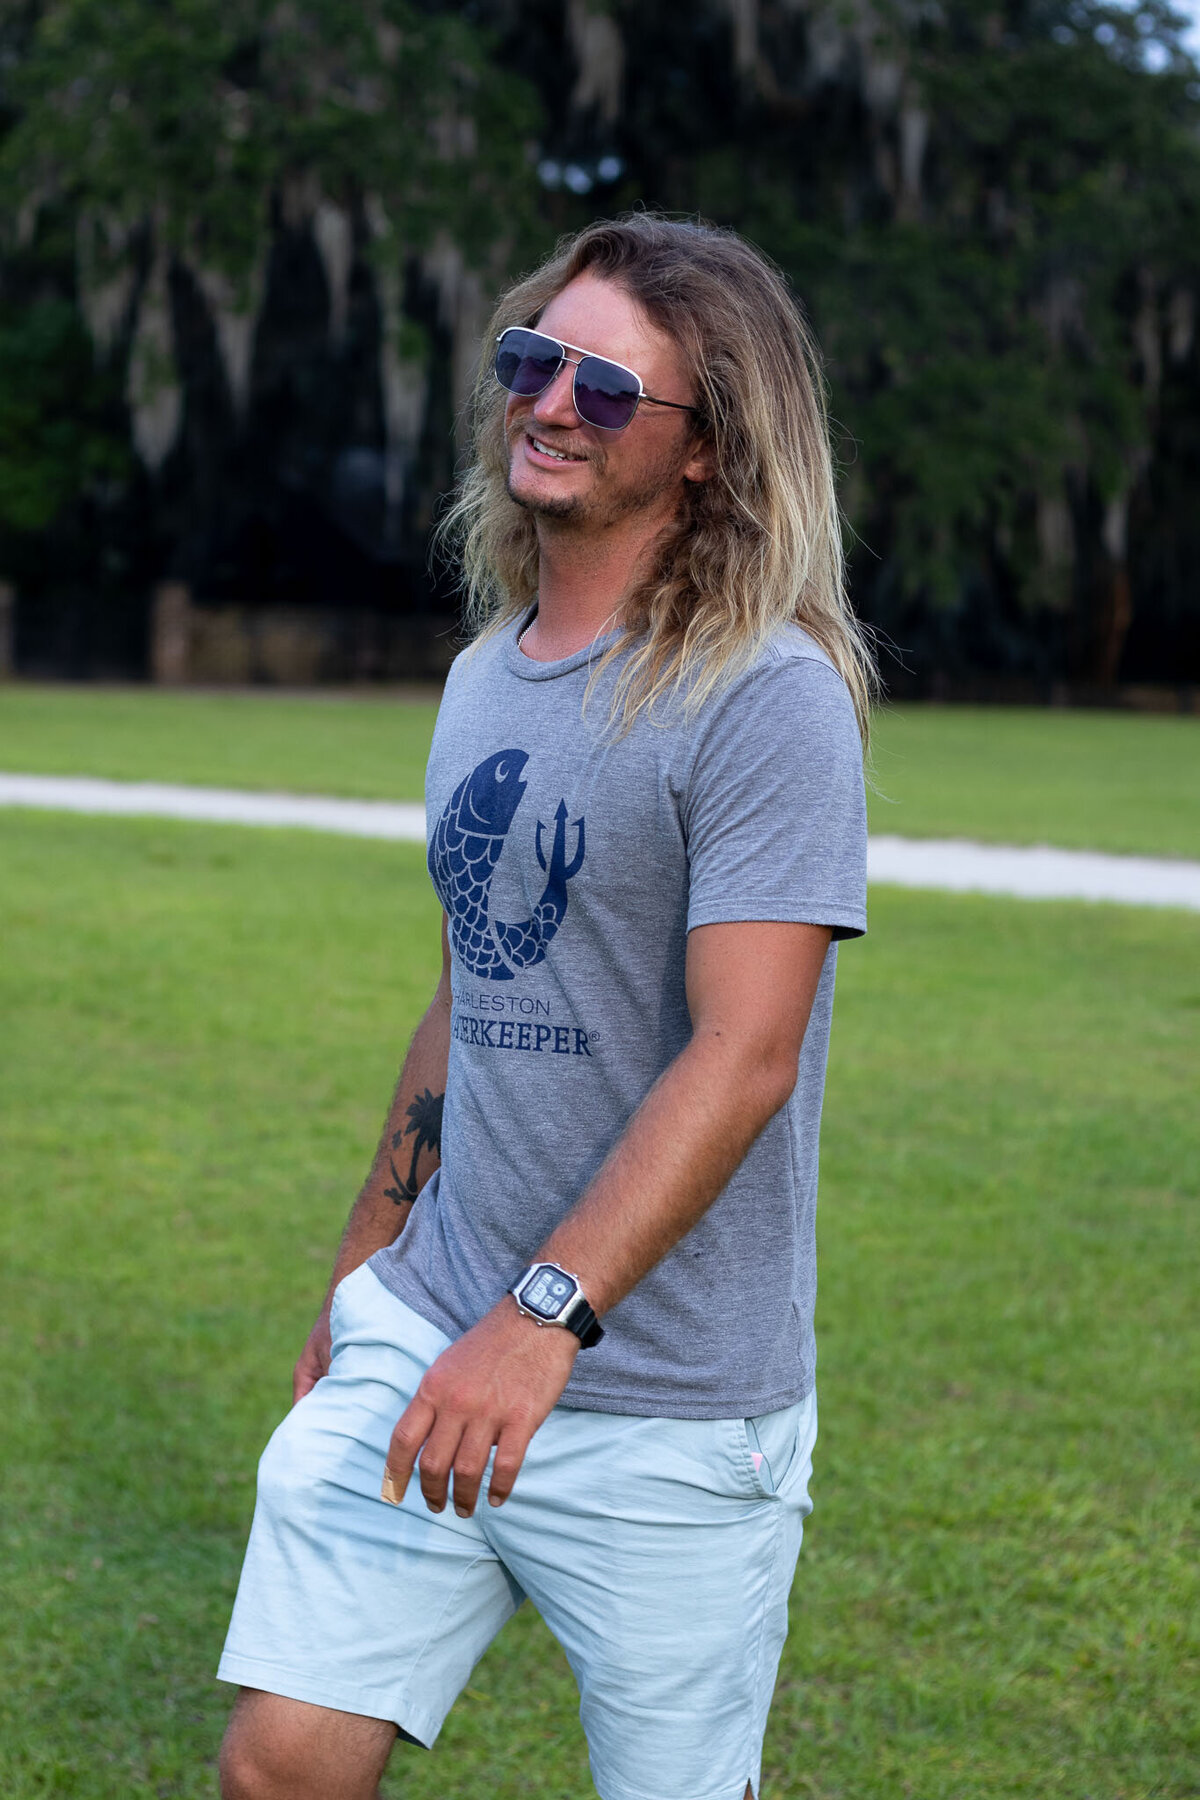 Andre Brierre Jr., a former Marine turned fishing charter Captain, is boyfriend to Jaye Everly a popular YouTuber and lifestyle photographer in Charleston, SC